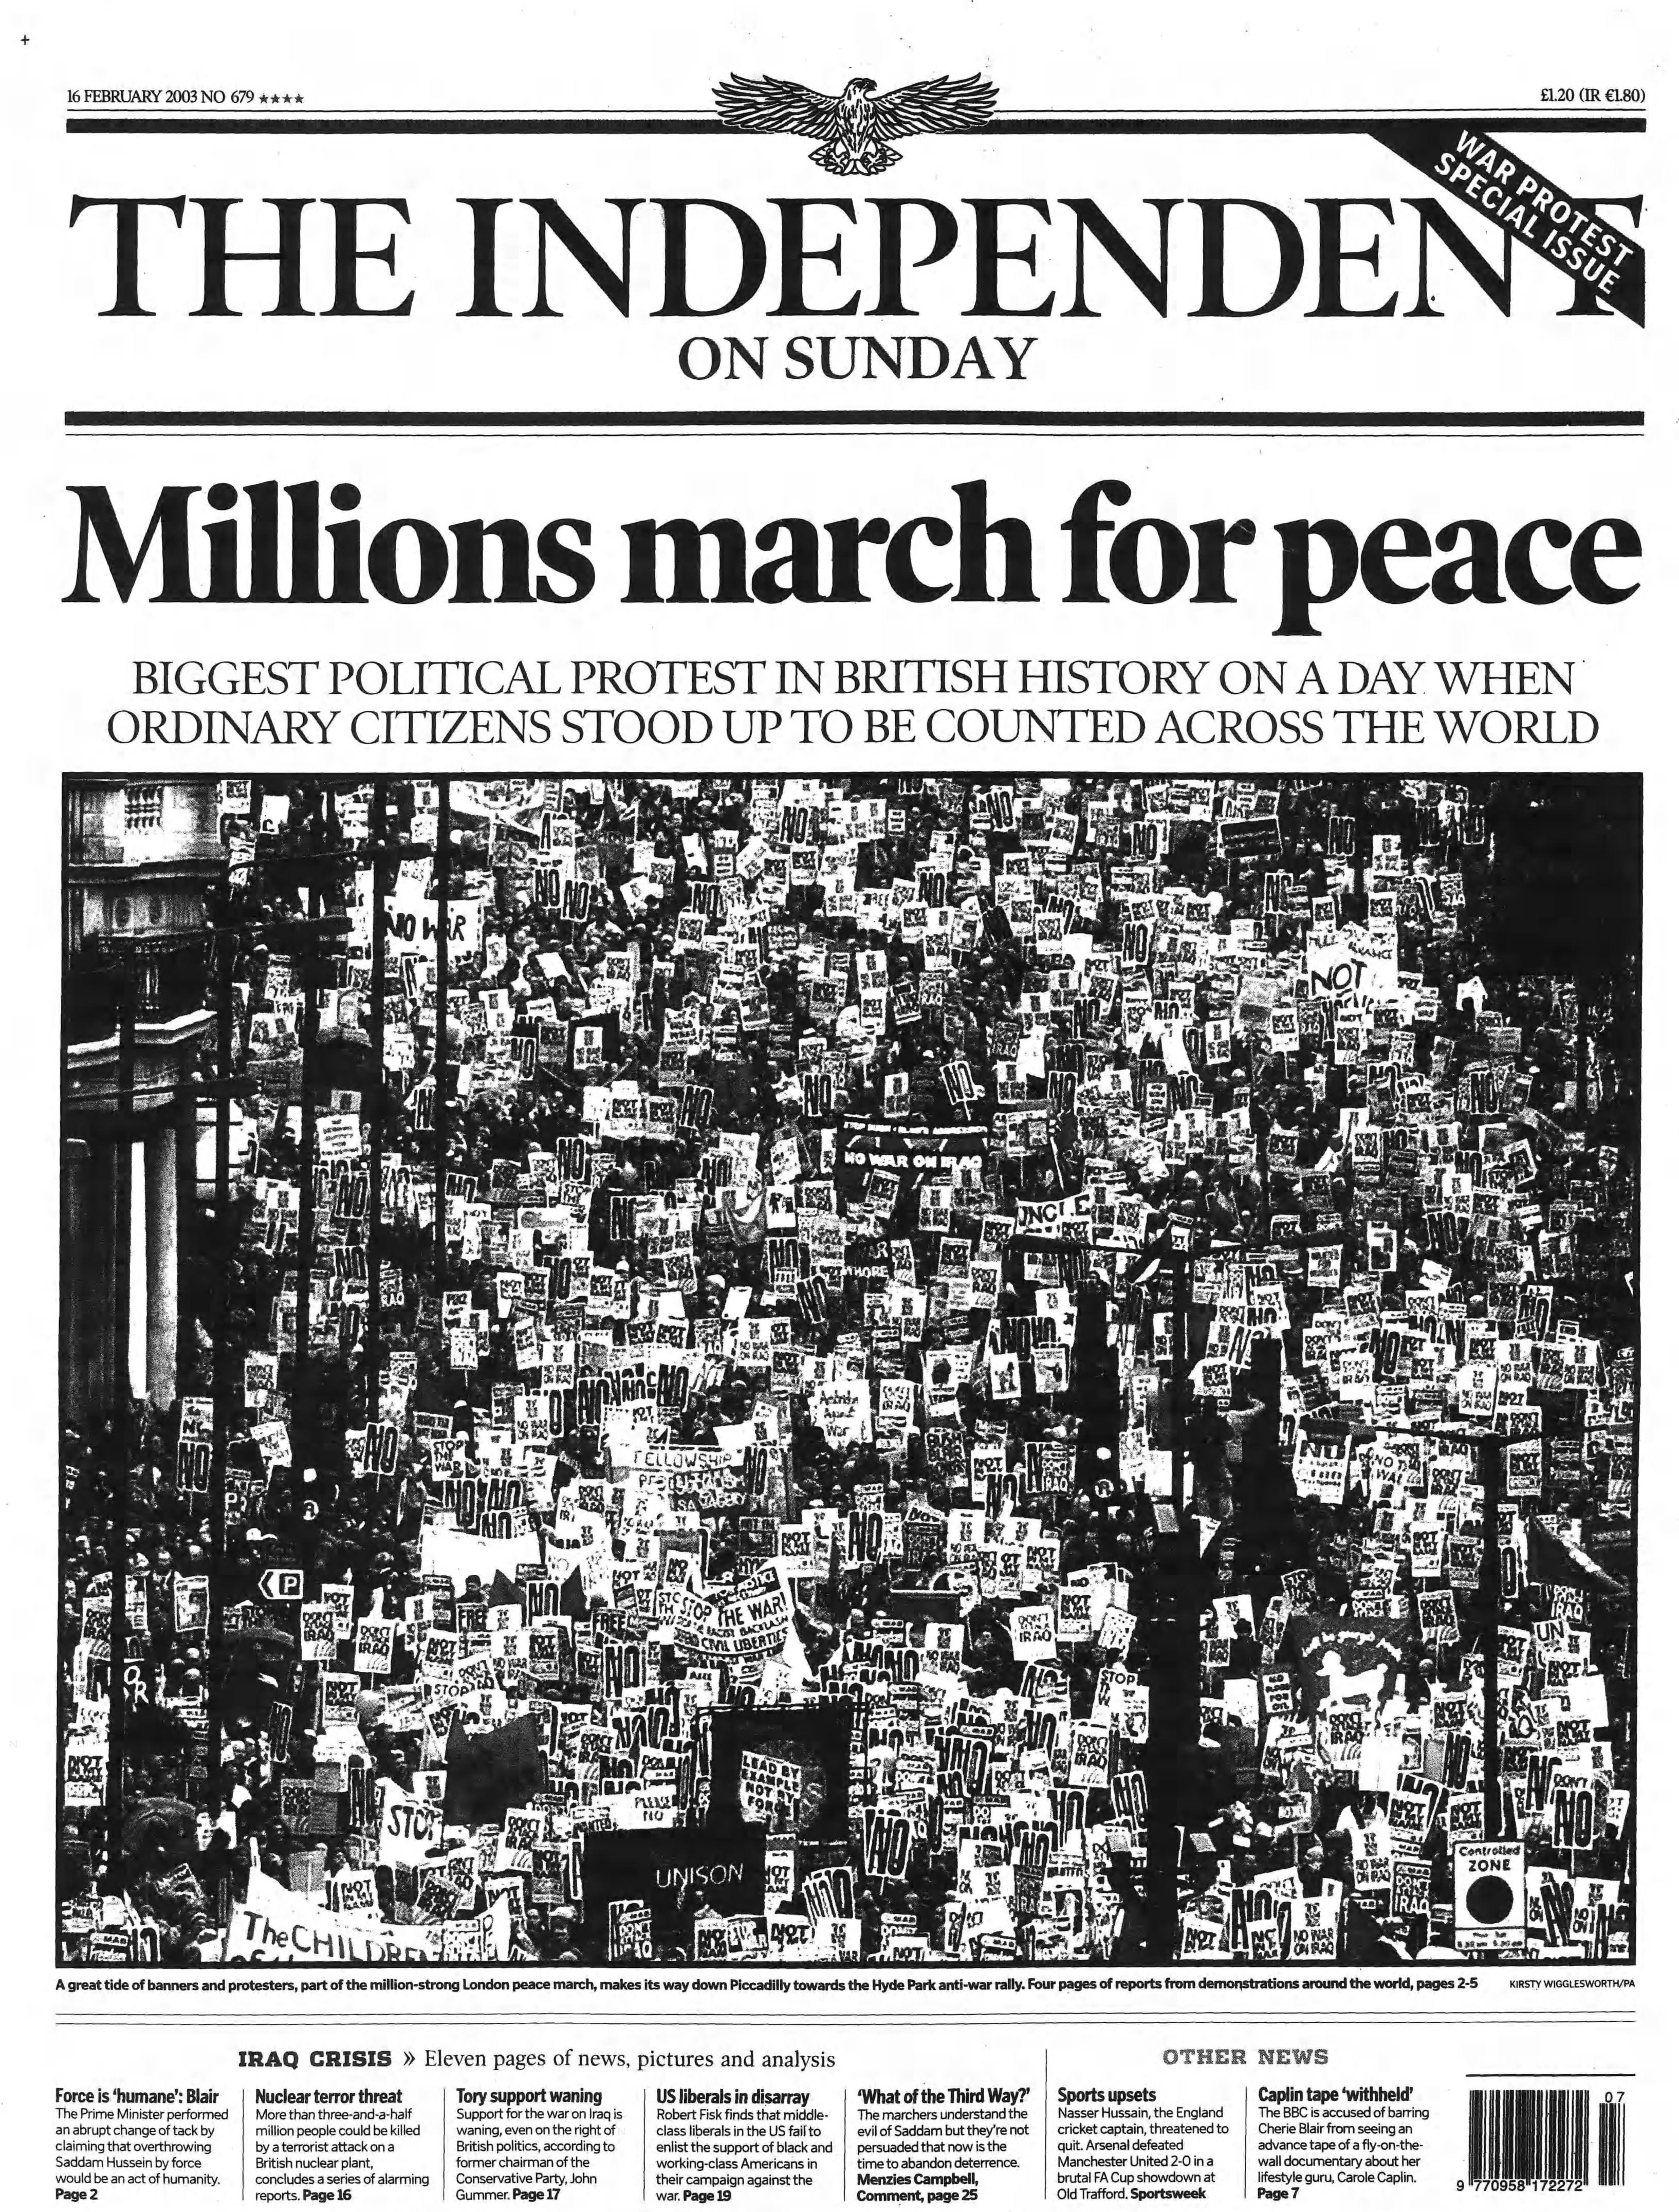 The Independent on Sunday front page on 16 February 2003